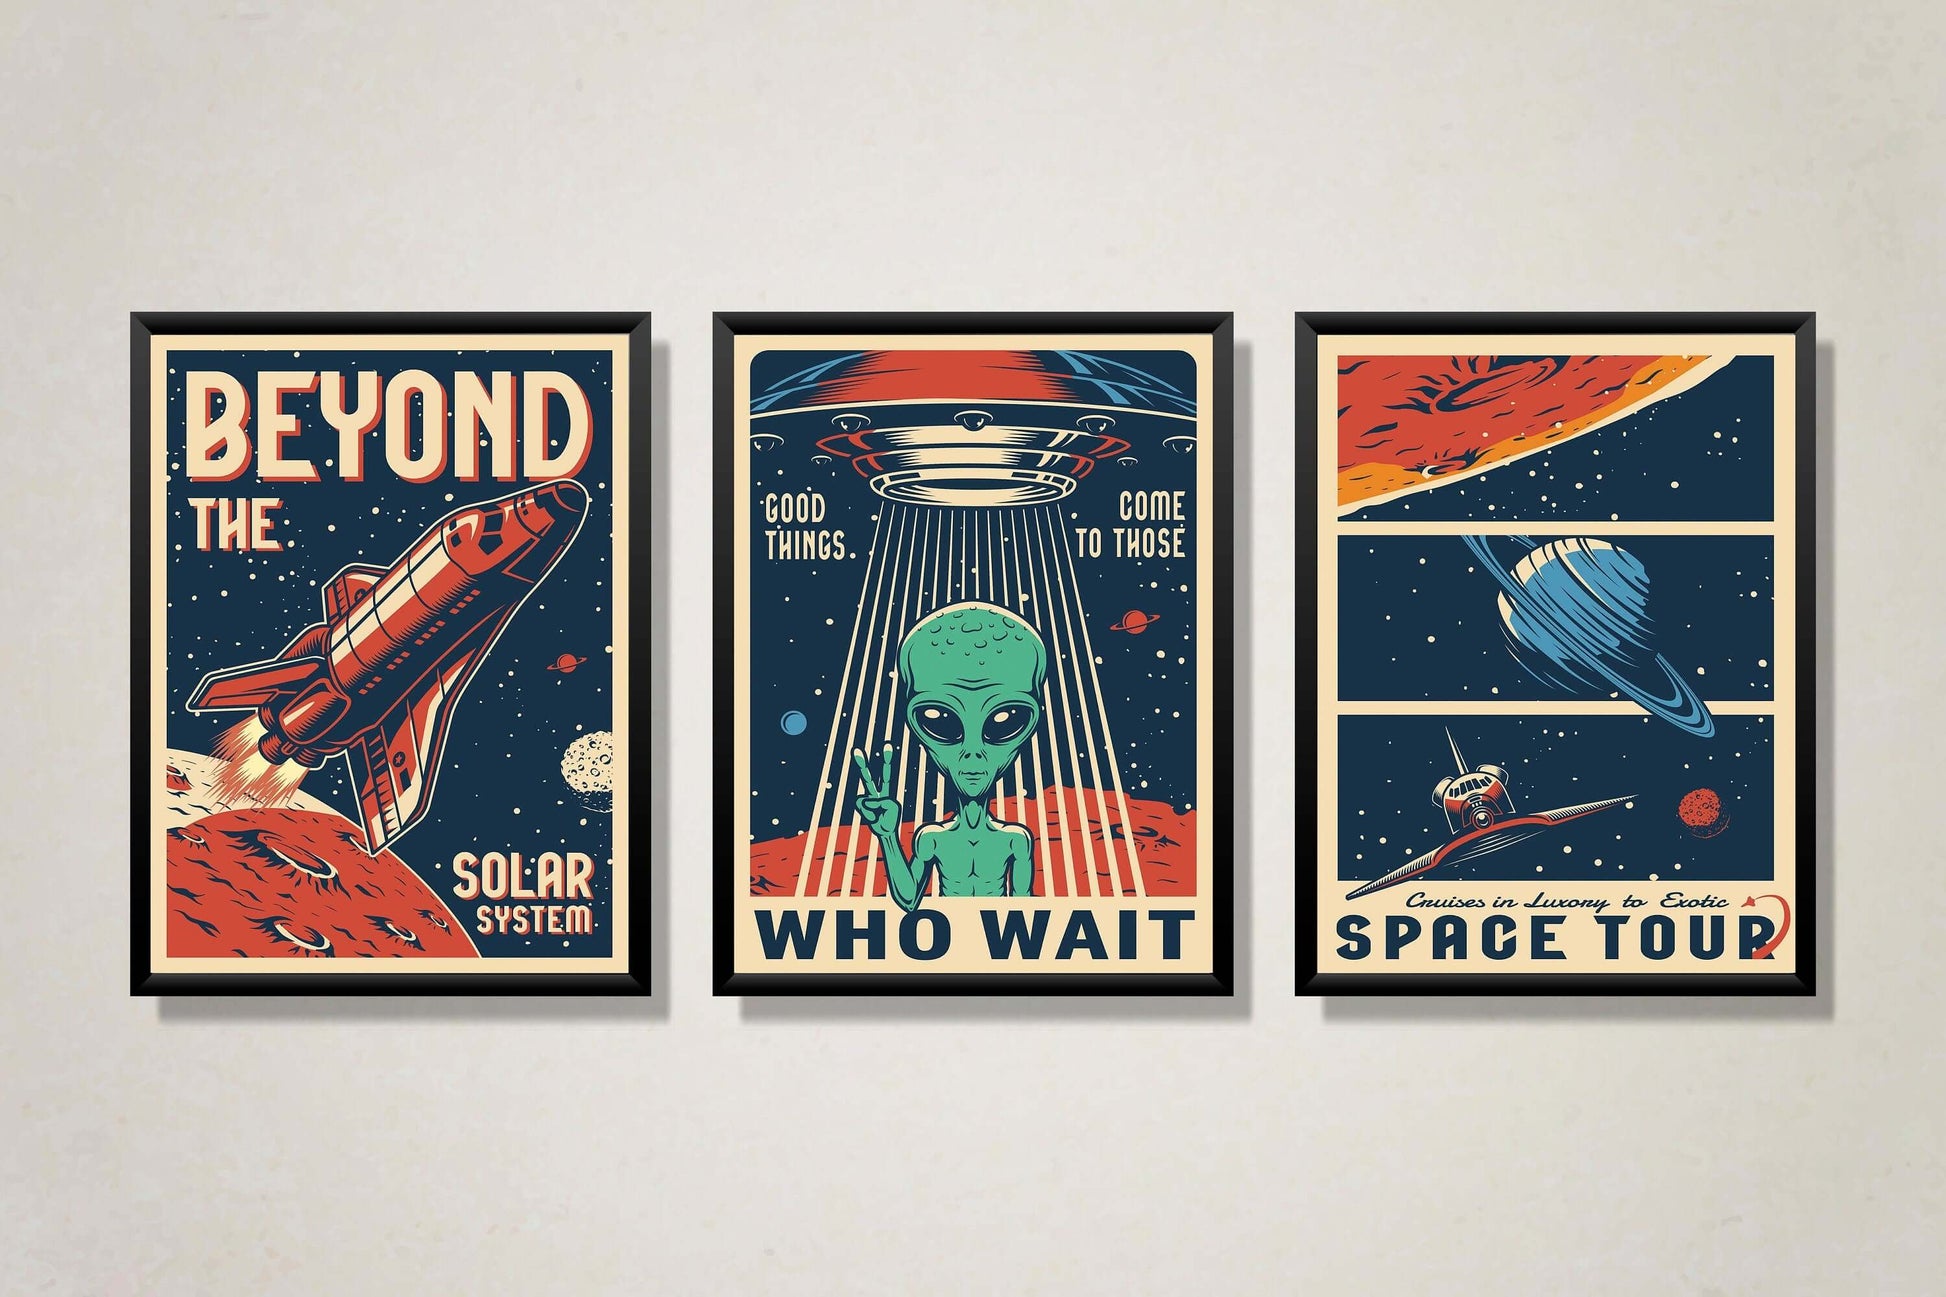 Retro Space Poster, Space Travel Poster, Space Wall Art, Retro Space Prints, Space Travel Print, Space Illustration, Alien Poster